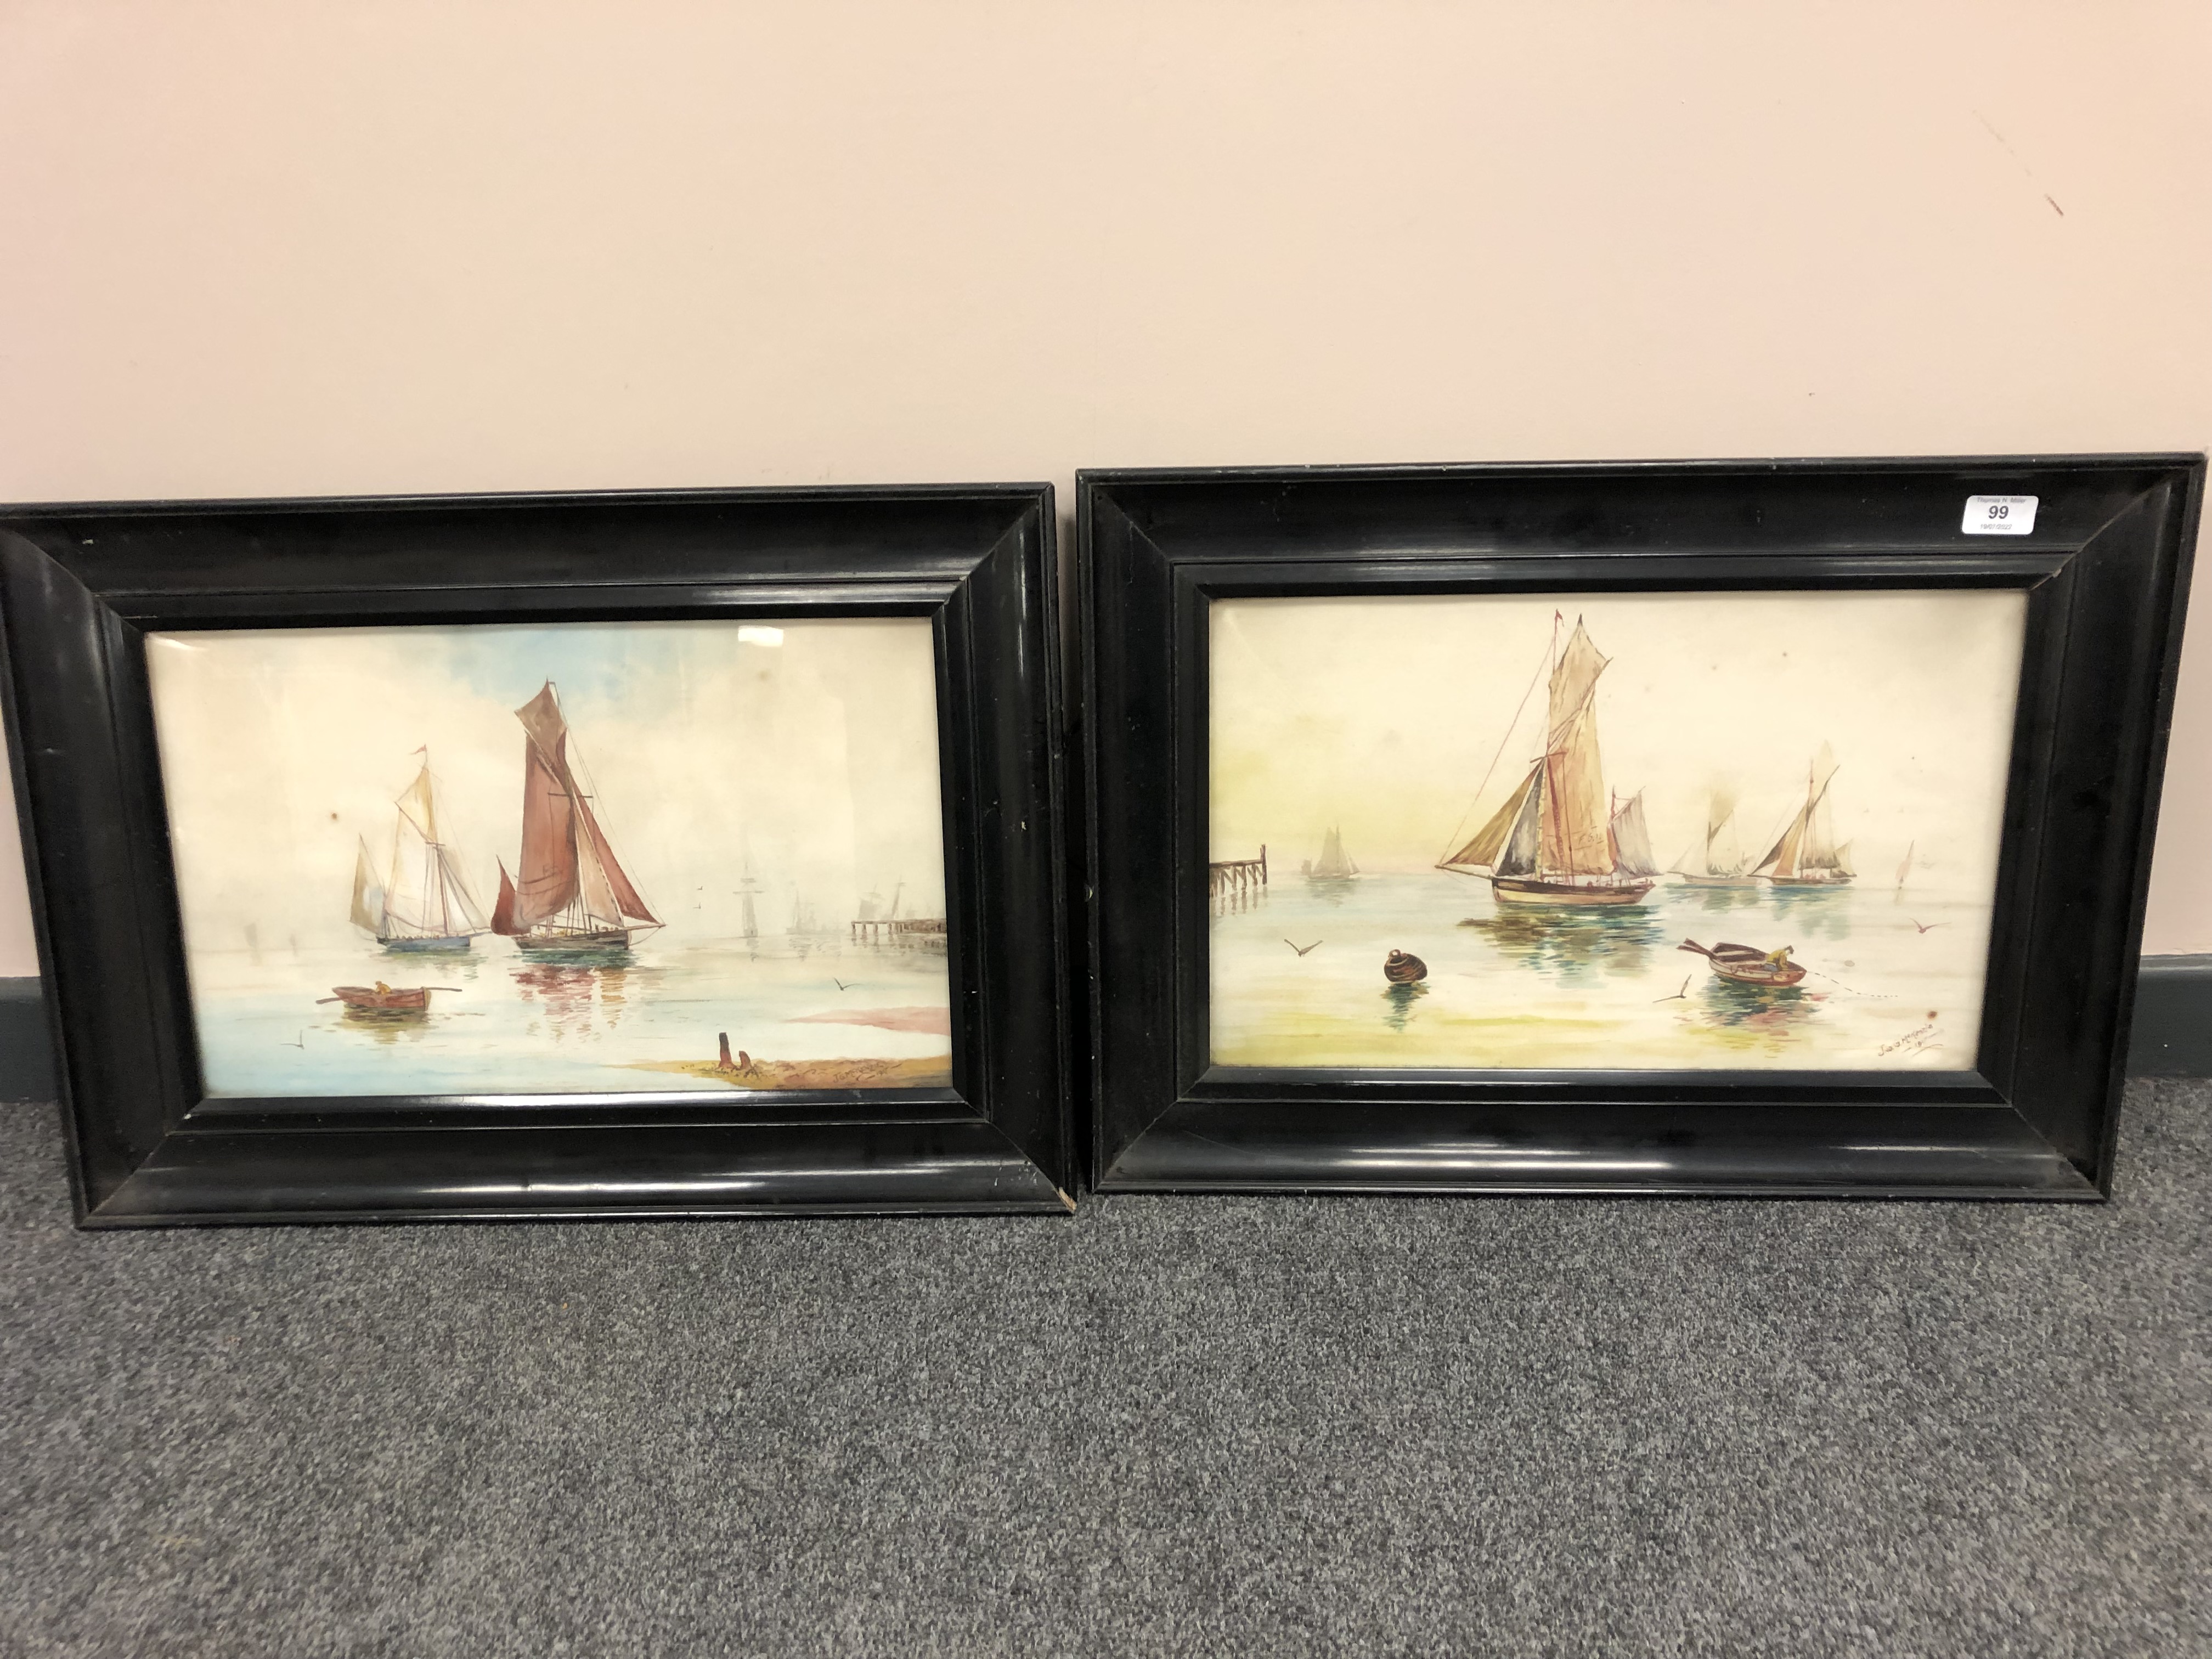 J G Mackenzie : Boats in calm water, watercolour 29 cm x 46 cm, together with the companion piece,